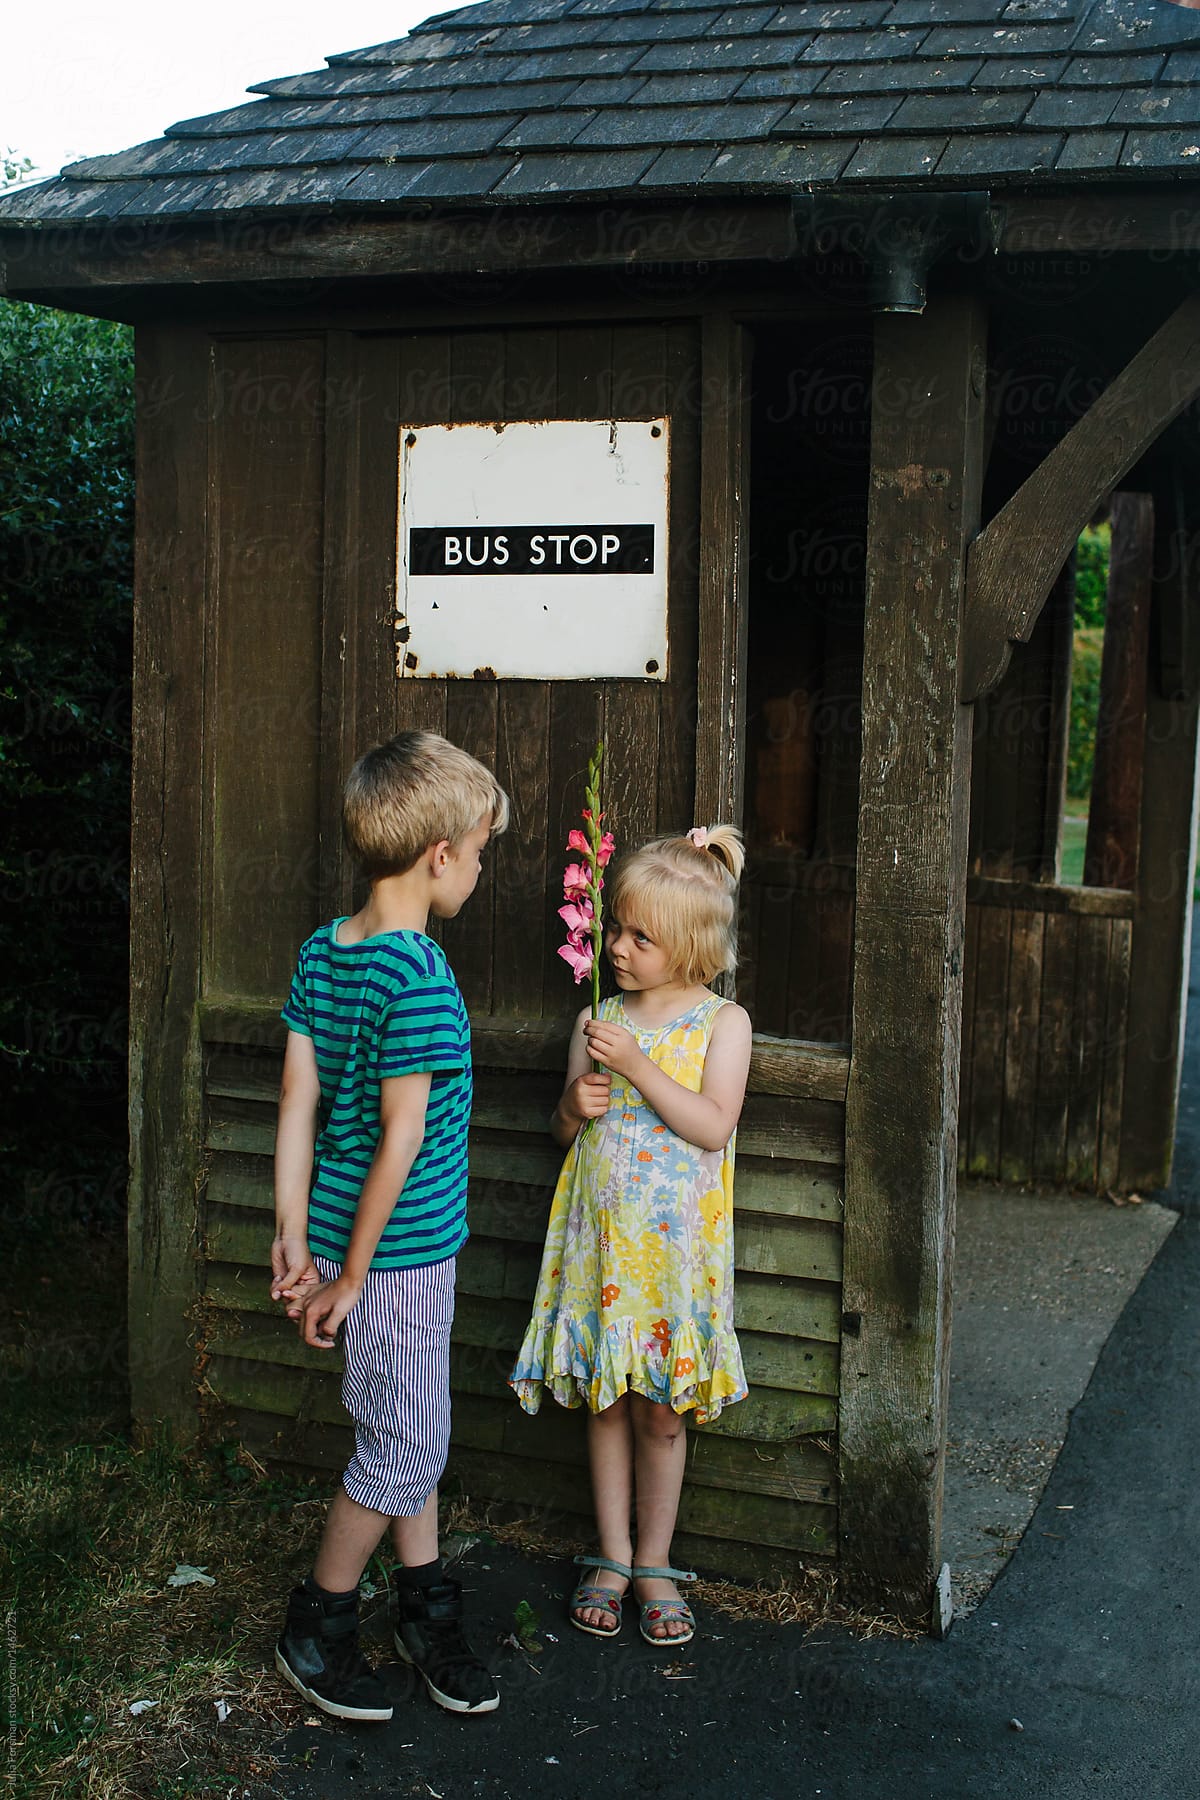 A boy and girl chat to each other while they wait for a bus.